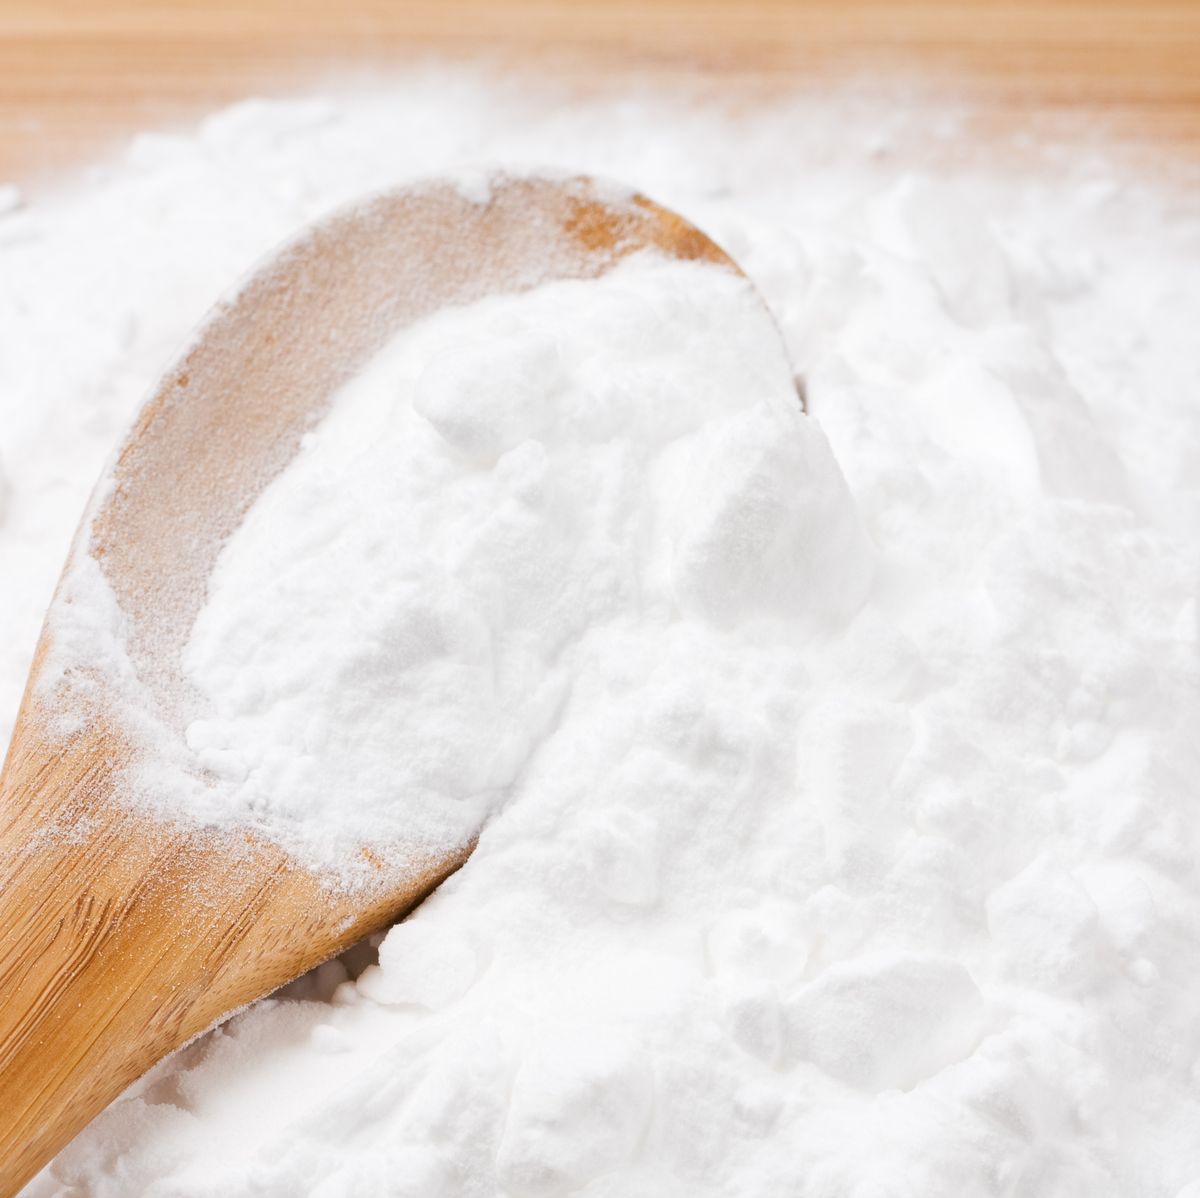 Can Baking Soda Really Improve Your Running Performance?